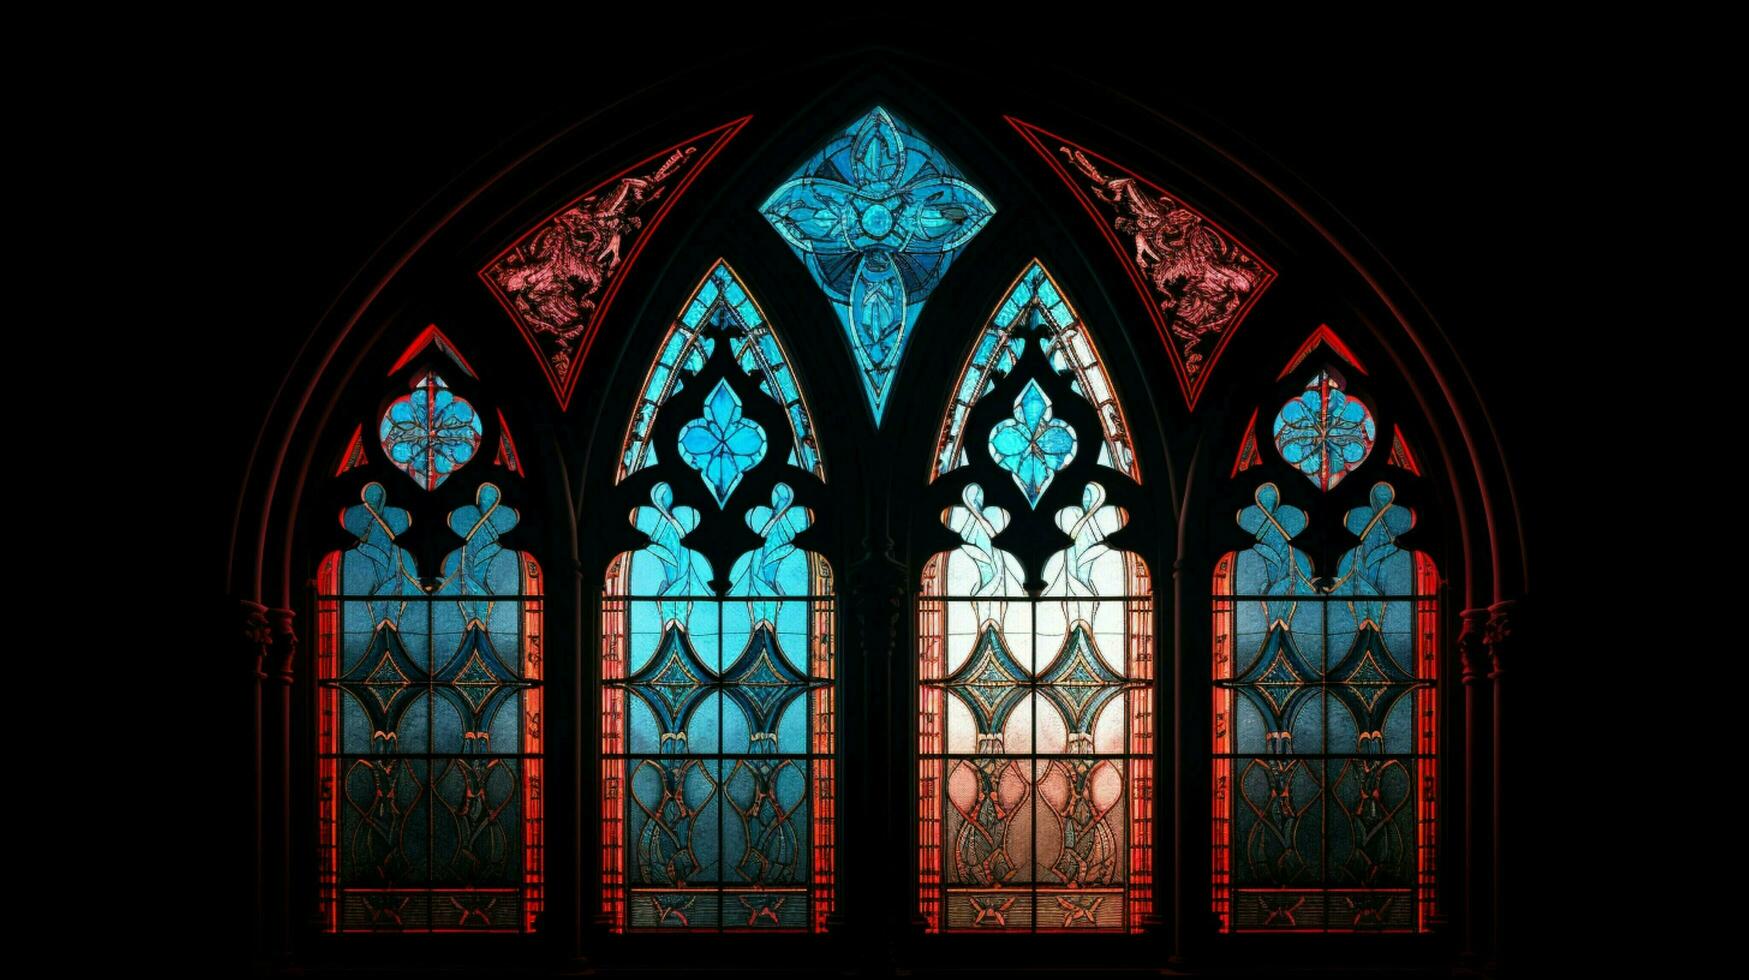 medieval chapel with gothic architecture stained glass photo